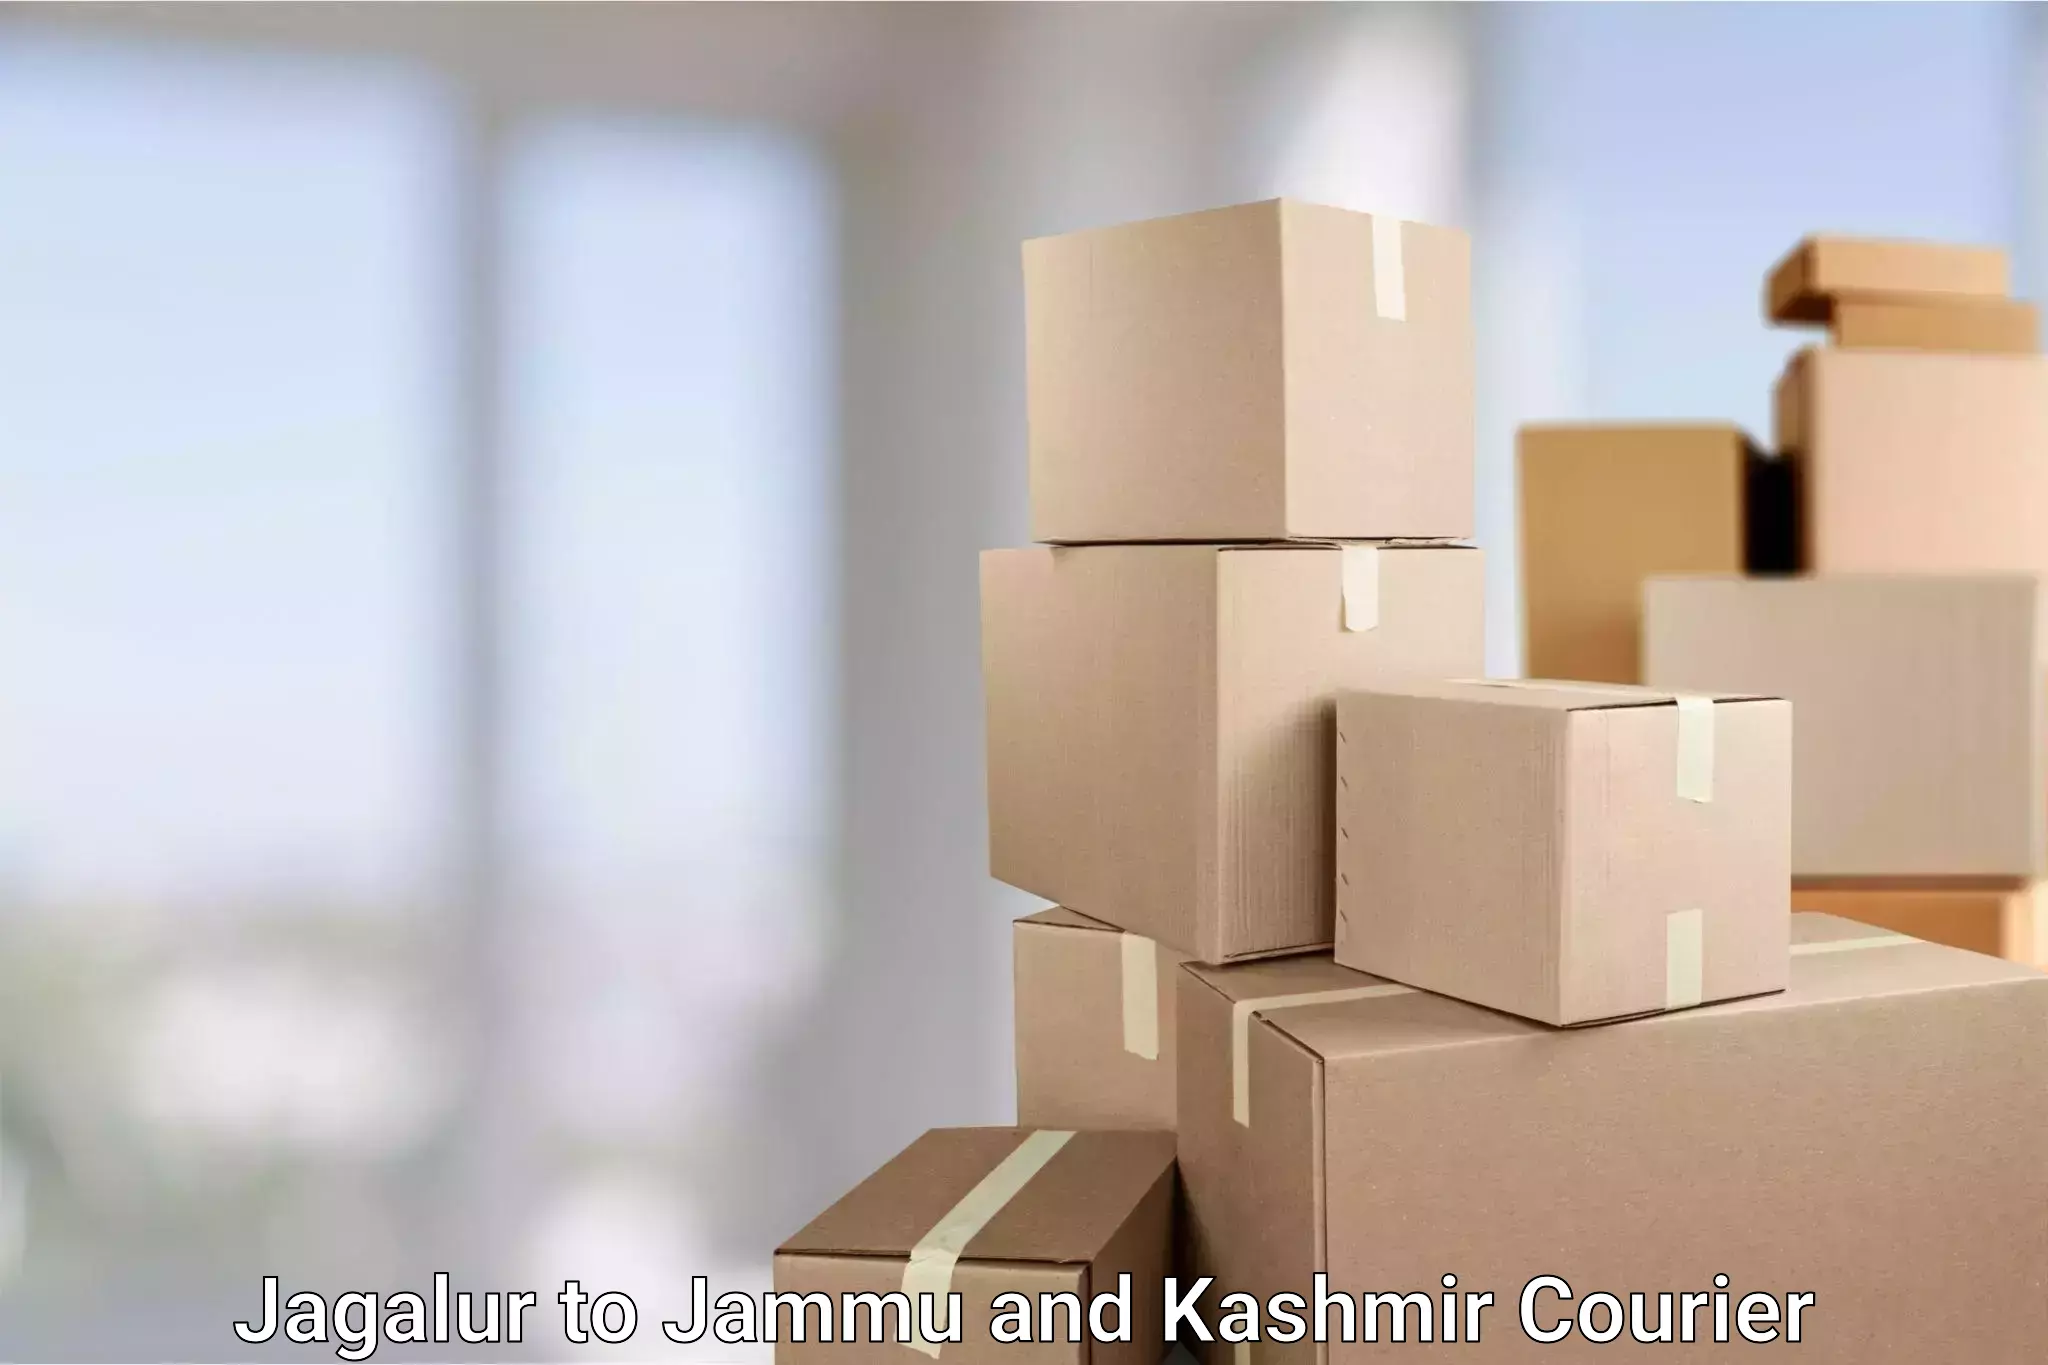 24-hour delivery options Jagalur to Jammu and Kashmir